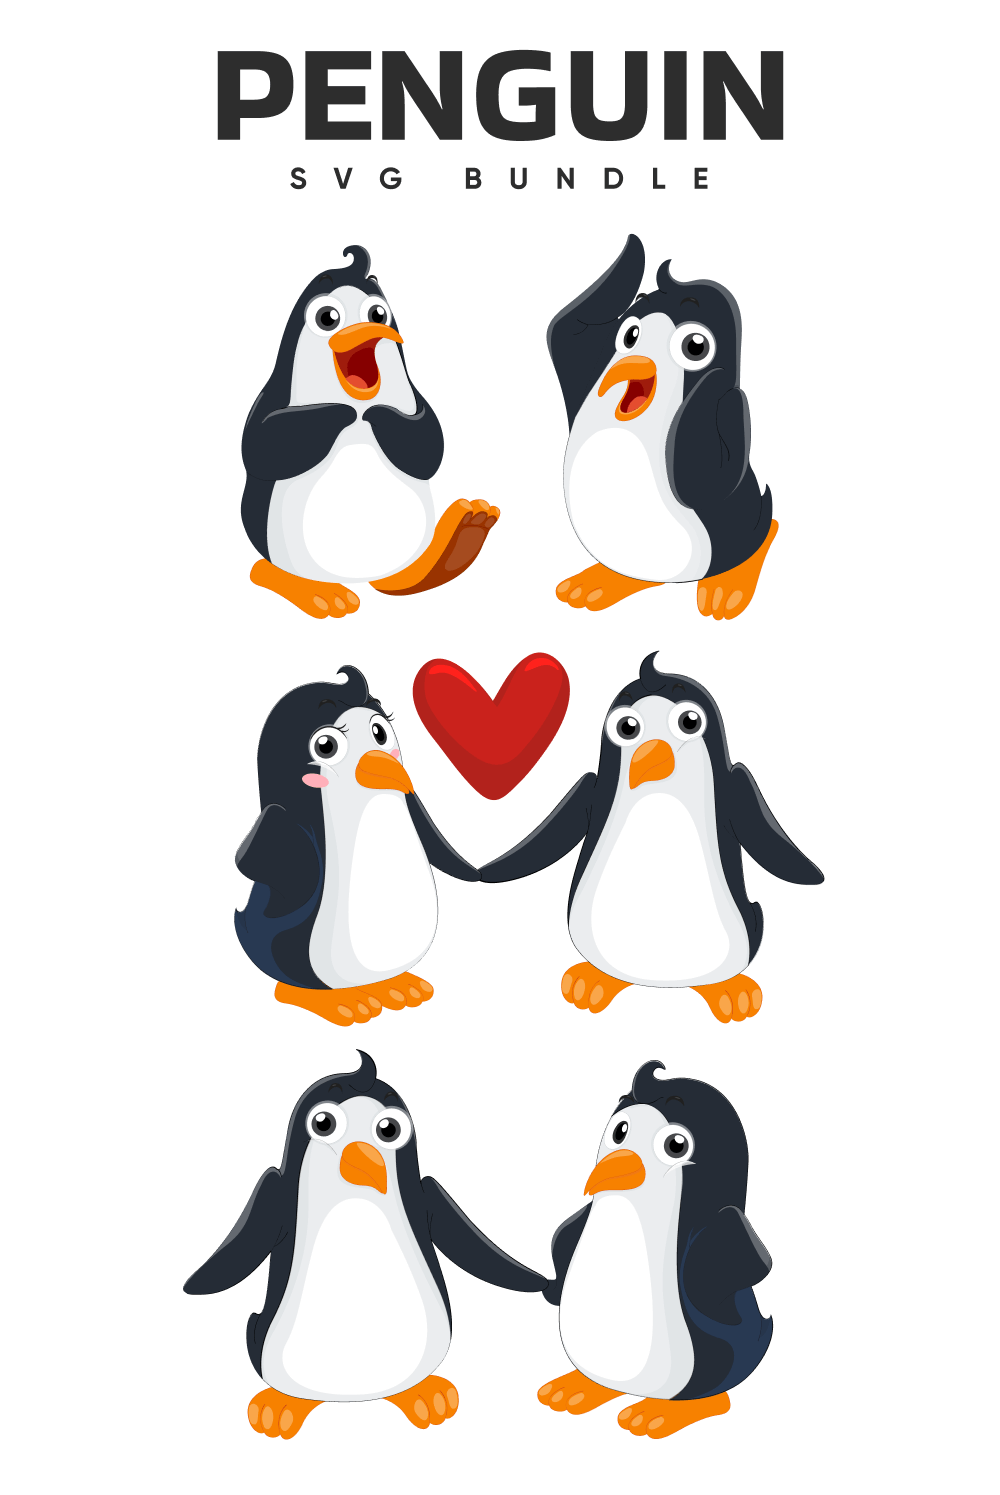 Penguin with a heart surrounded by penguins.